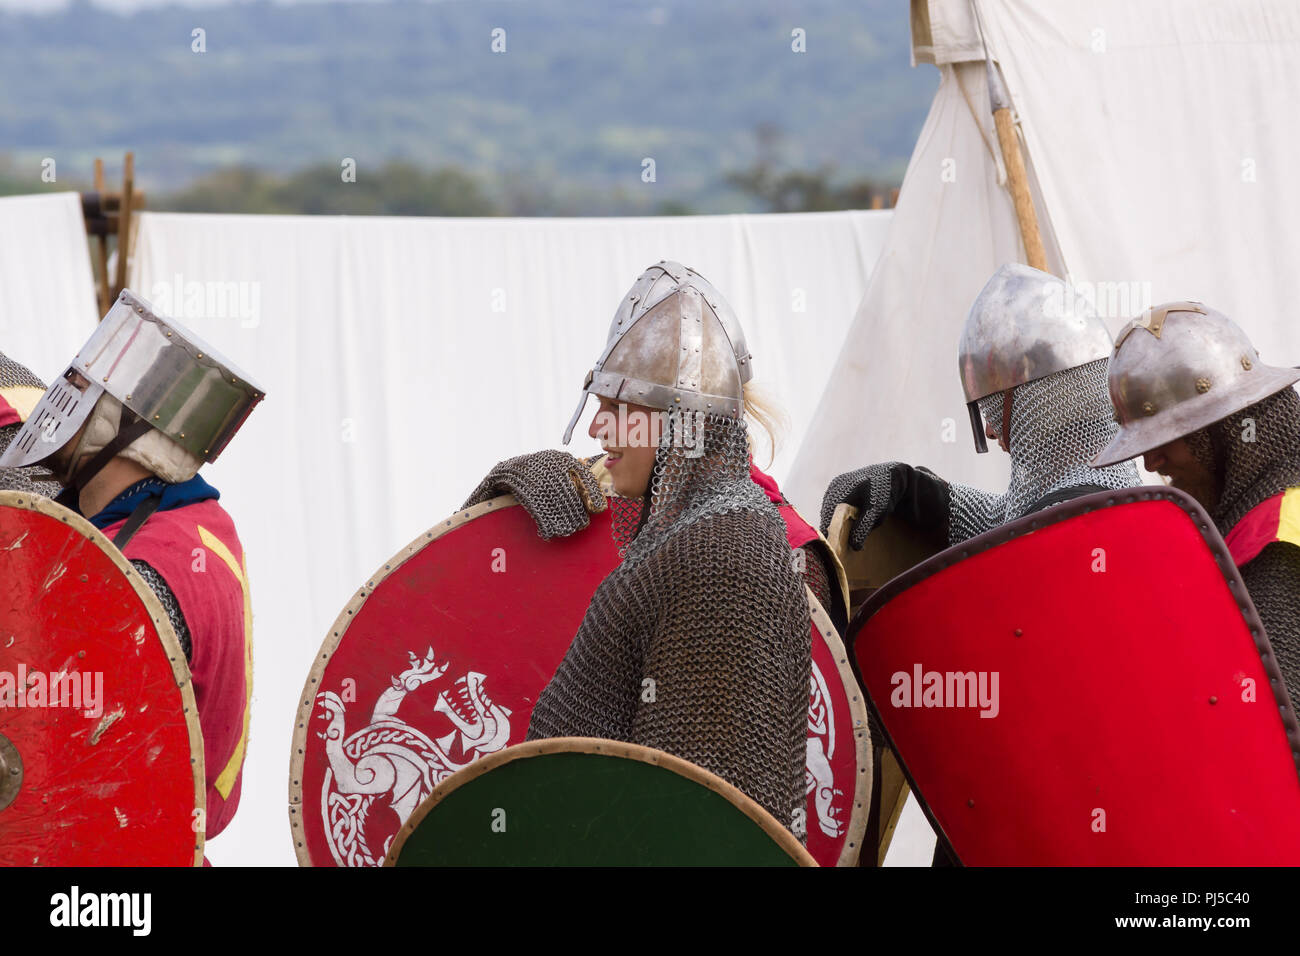 Medieval battle re-enactment of the Cwmwd Ial society re-enacting the battle of Crogen 1165 in Chirk North Wales 2018 Stock Photo